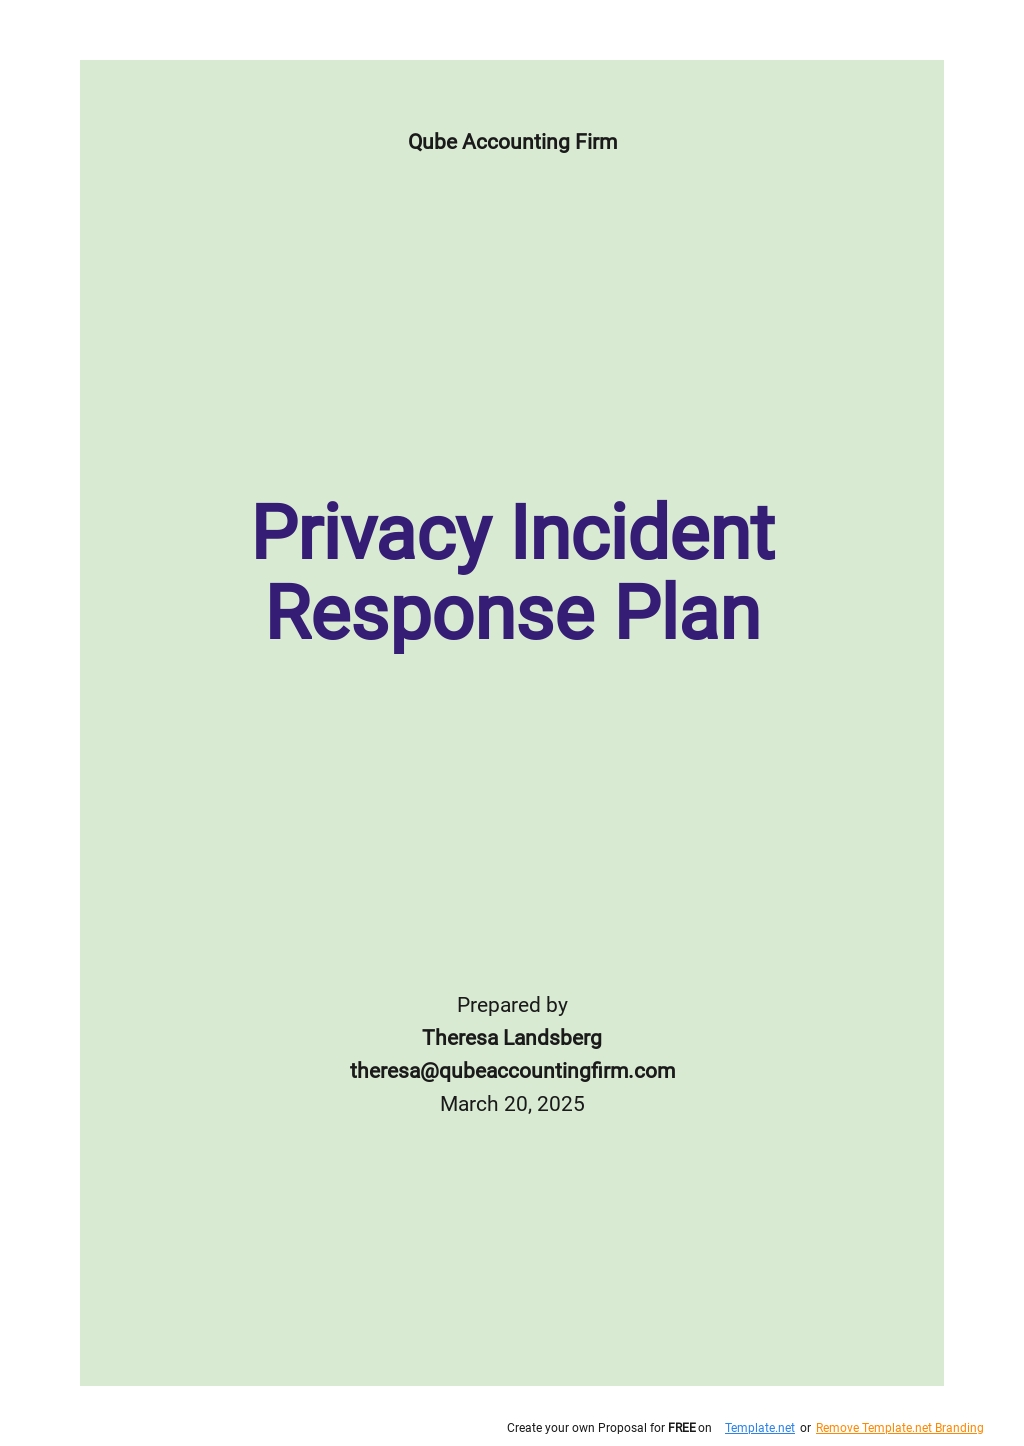 Privacy Incident Response Plan Template.jpe